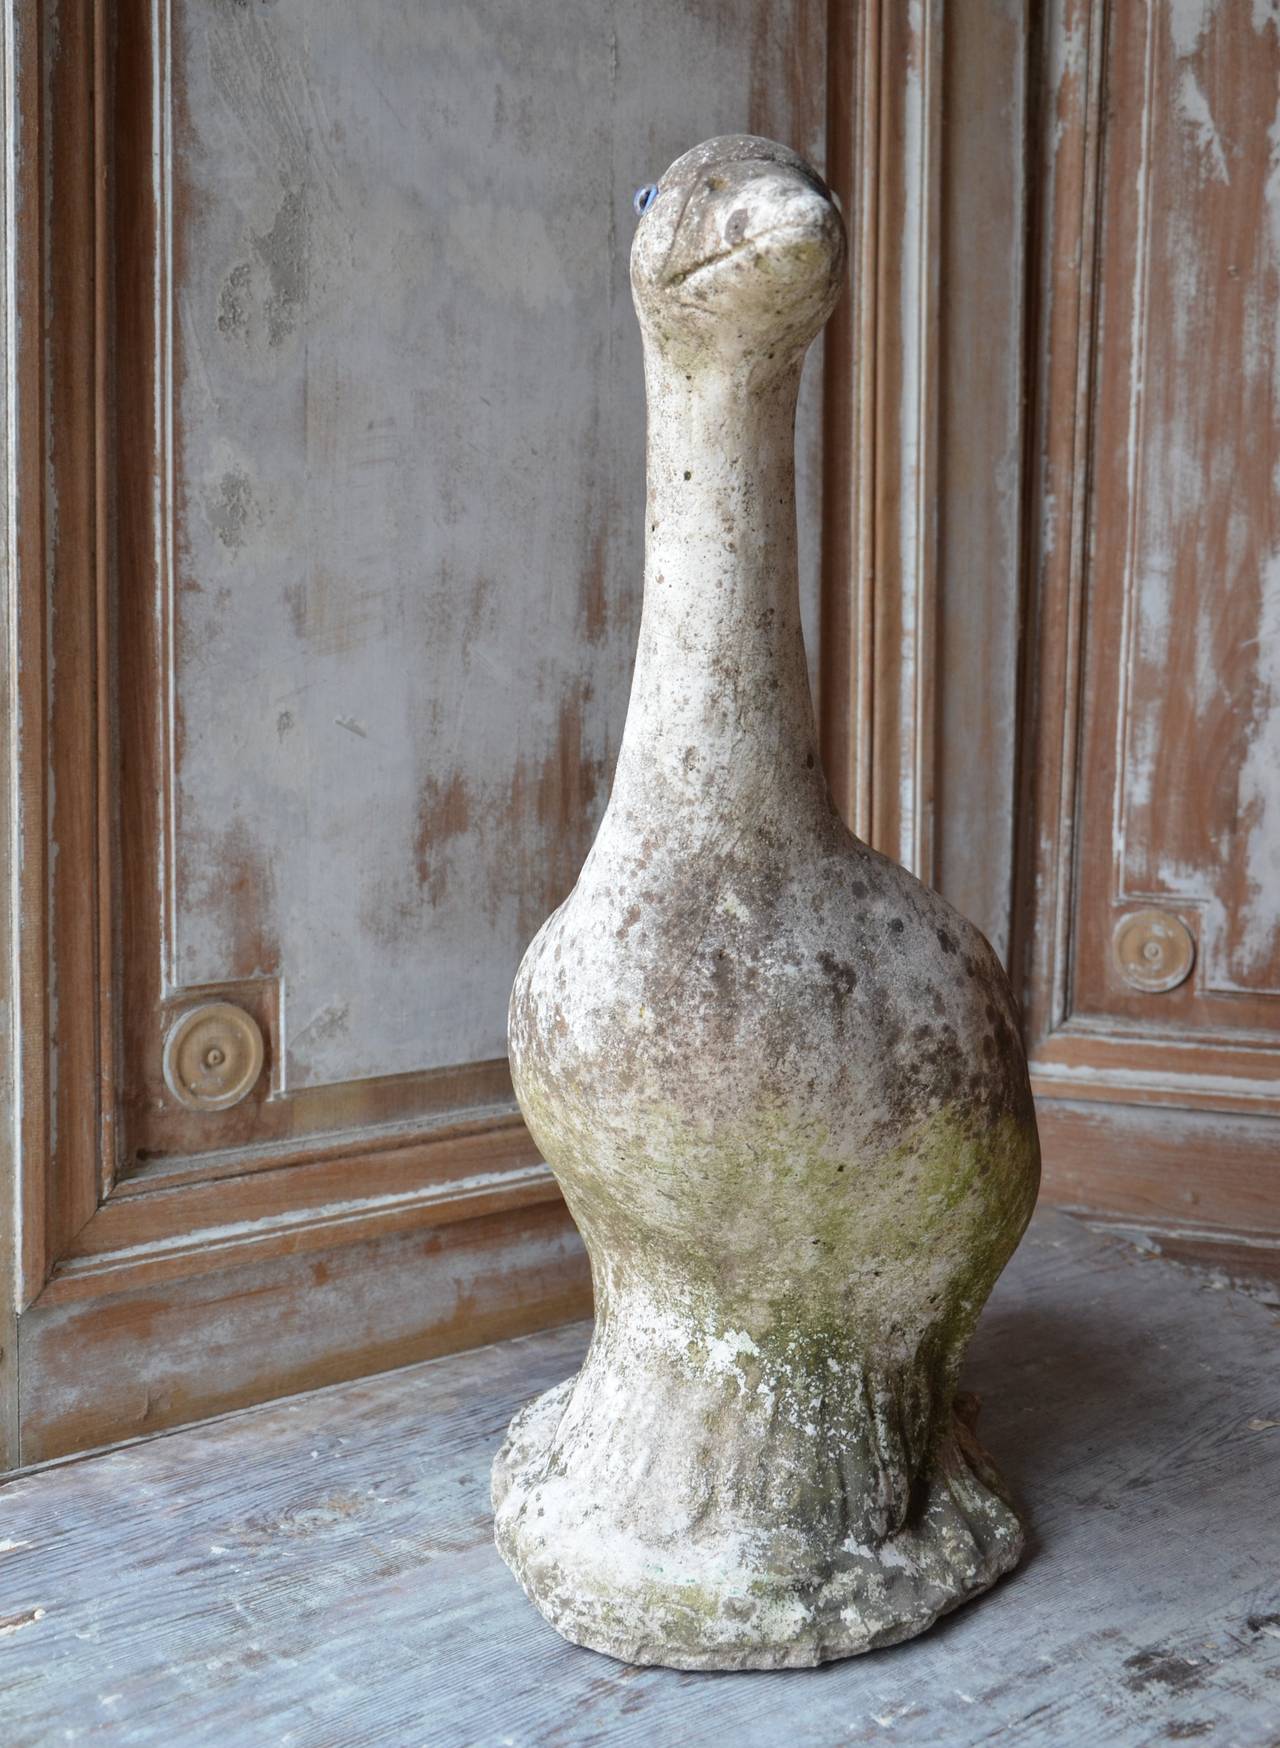 Charming 19th century stone goose for your garden with traces of the original painted finish.
France, late 19th century.